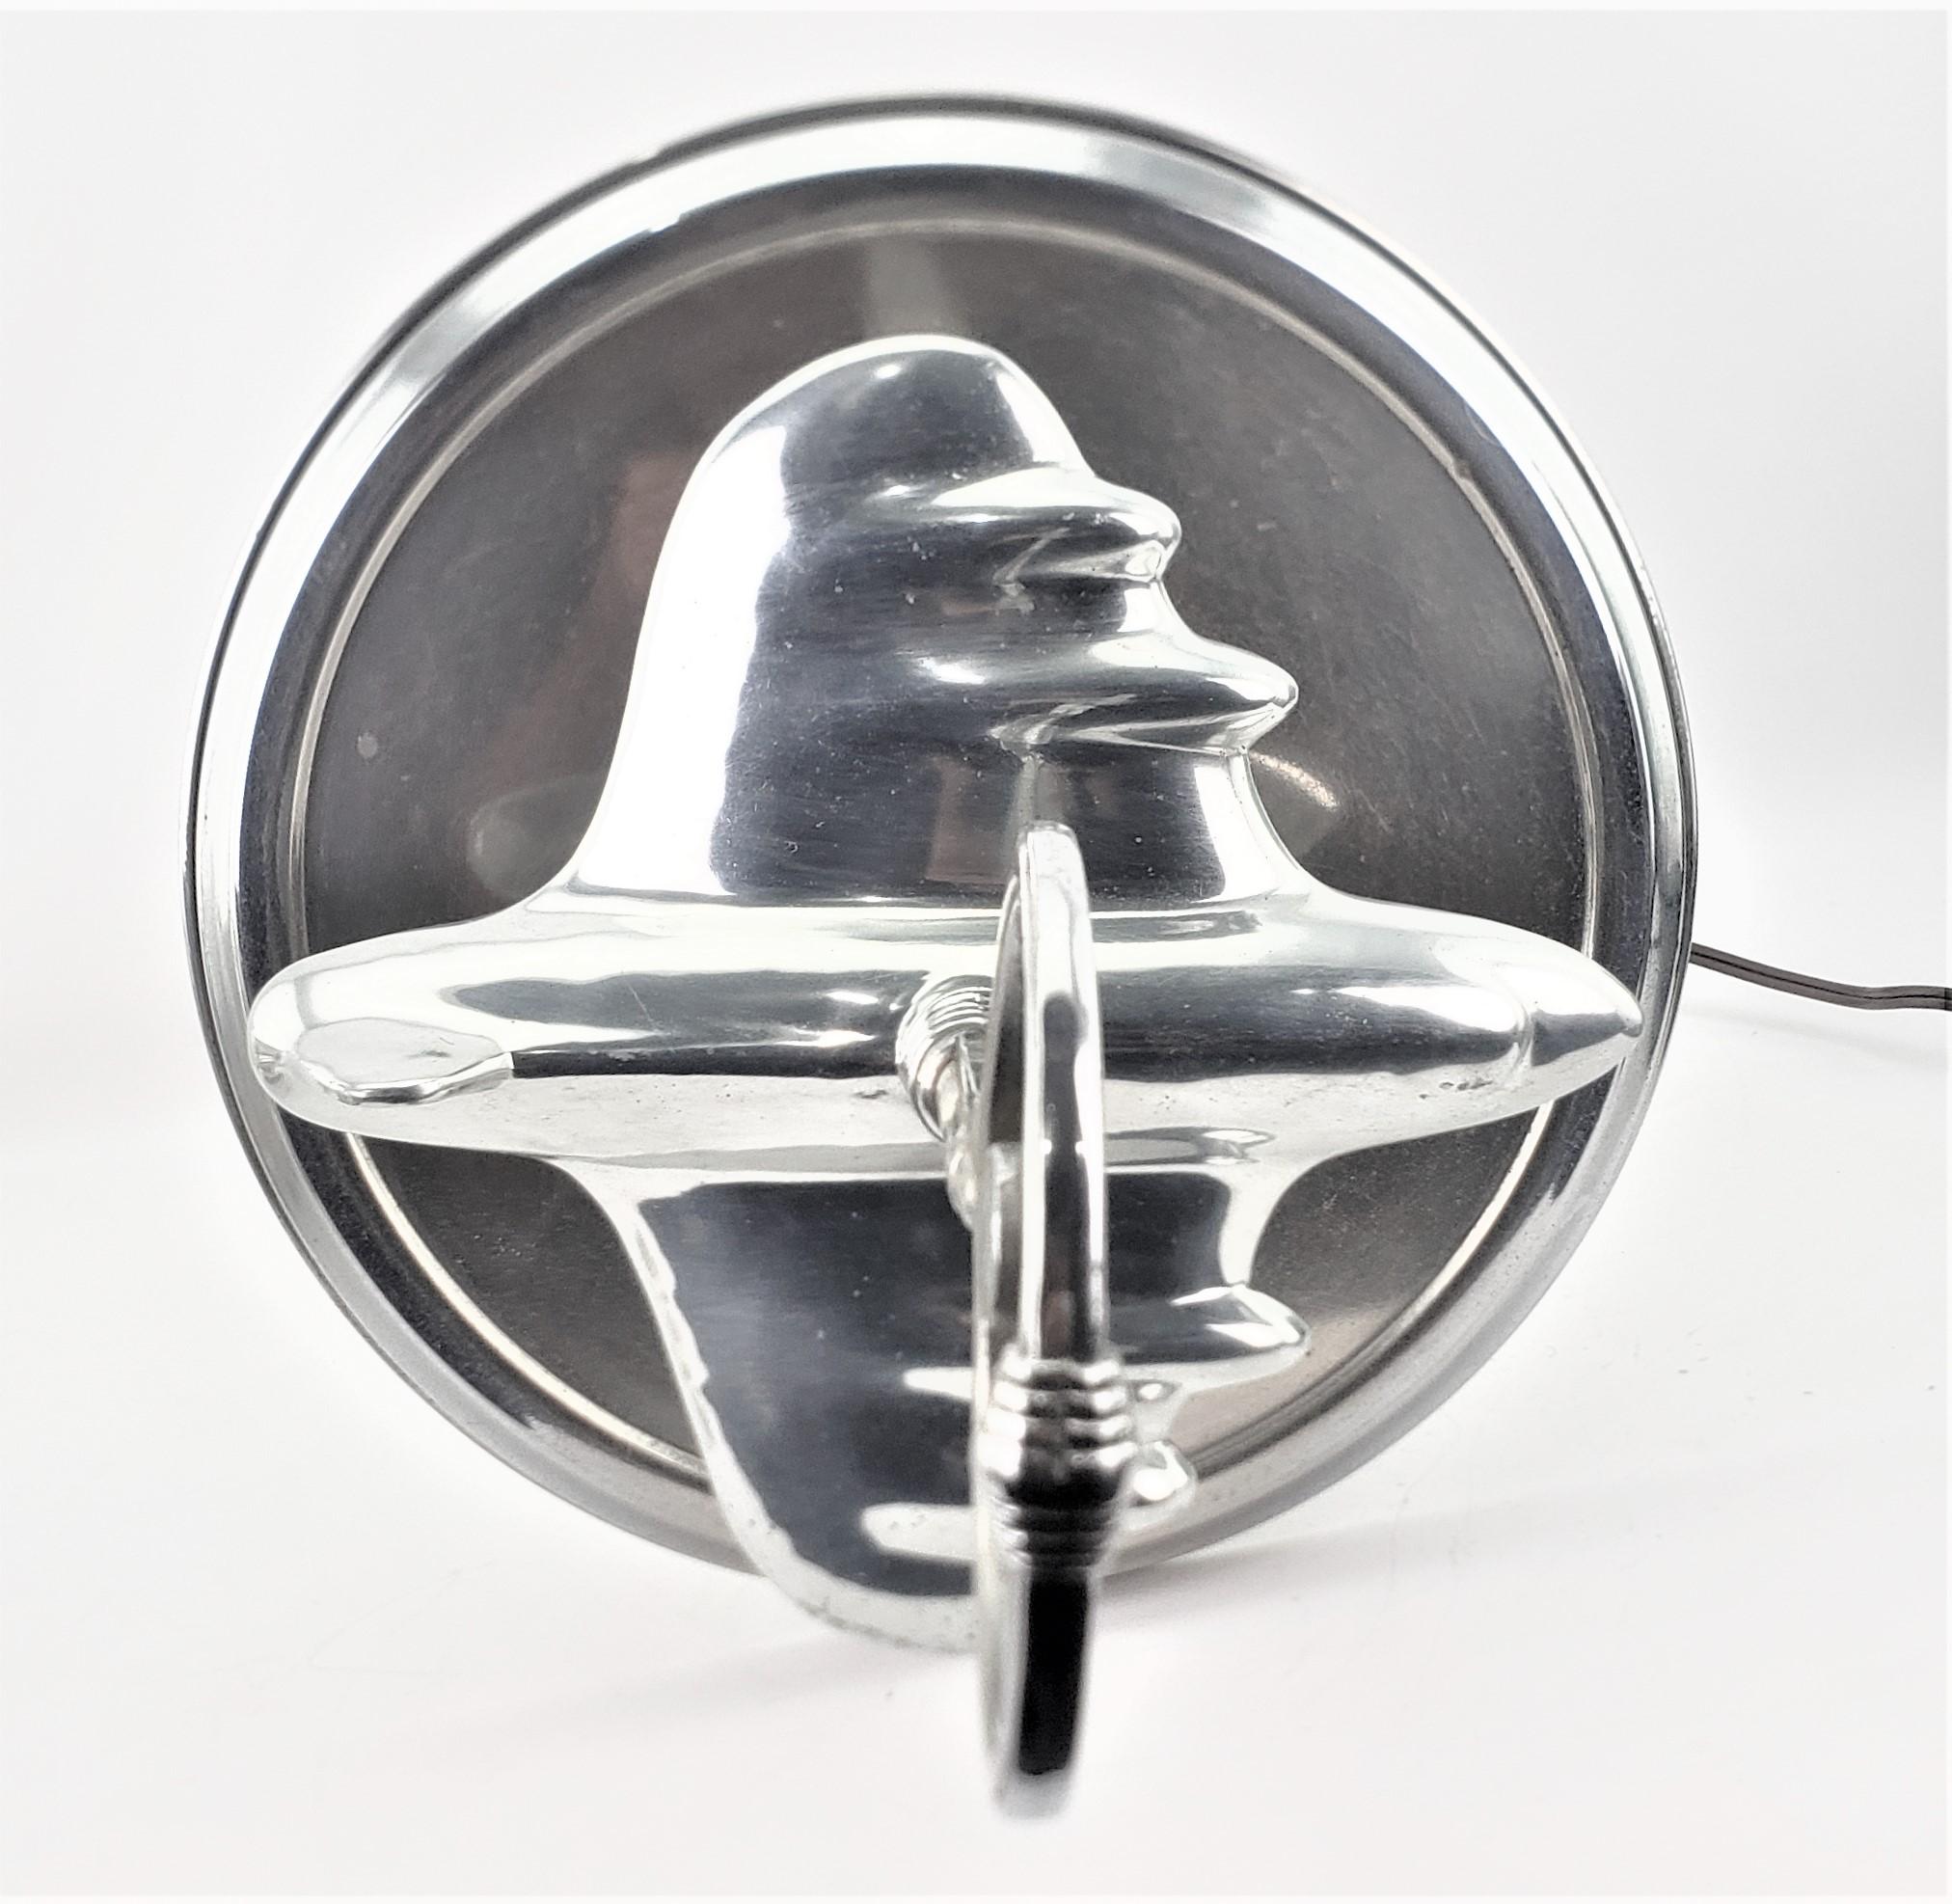 Unique Art Deco Styled Chrome Jet Airplane Lighted Smoker's Stand or Table For Sale 3